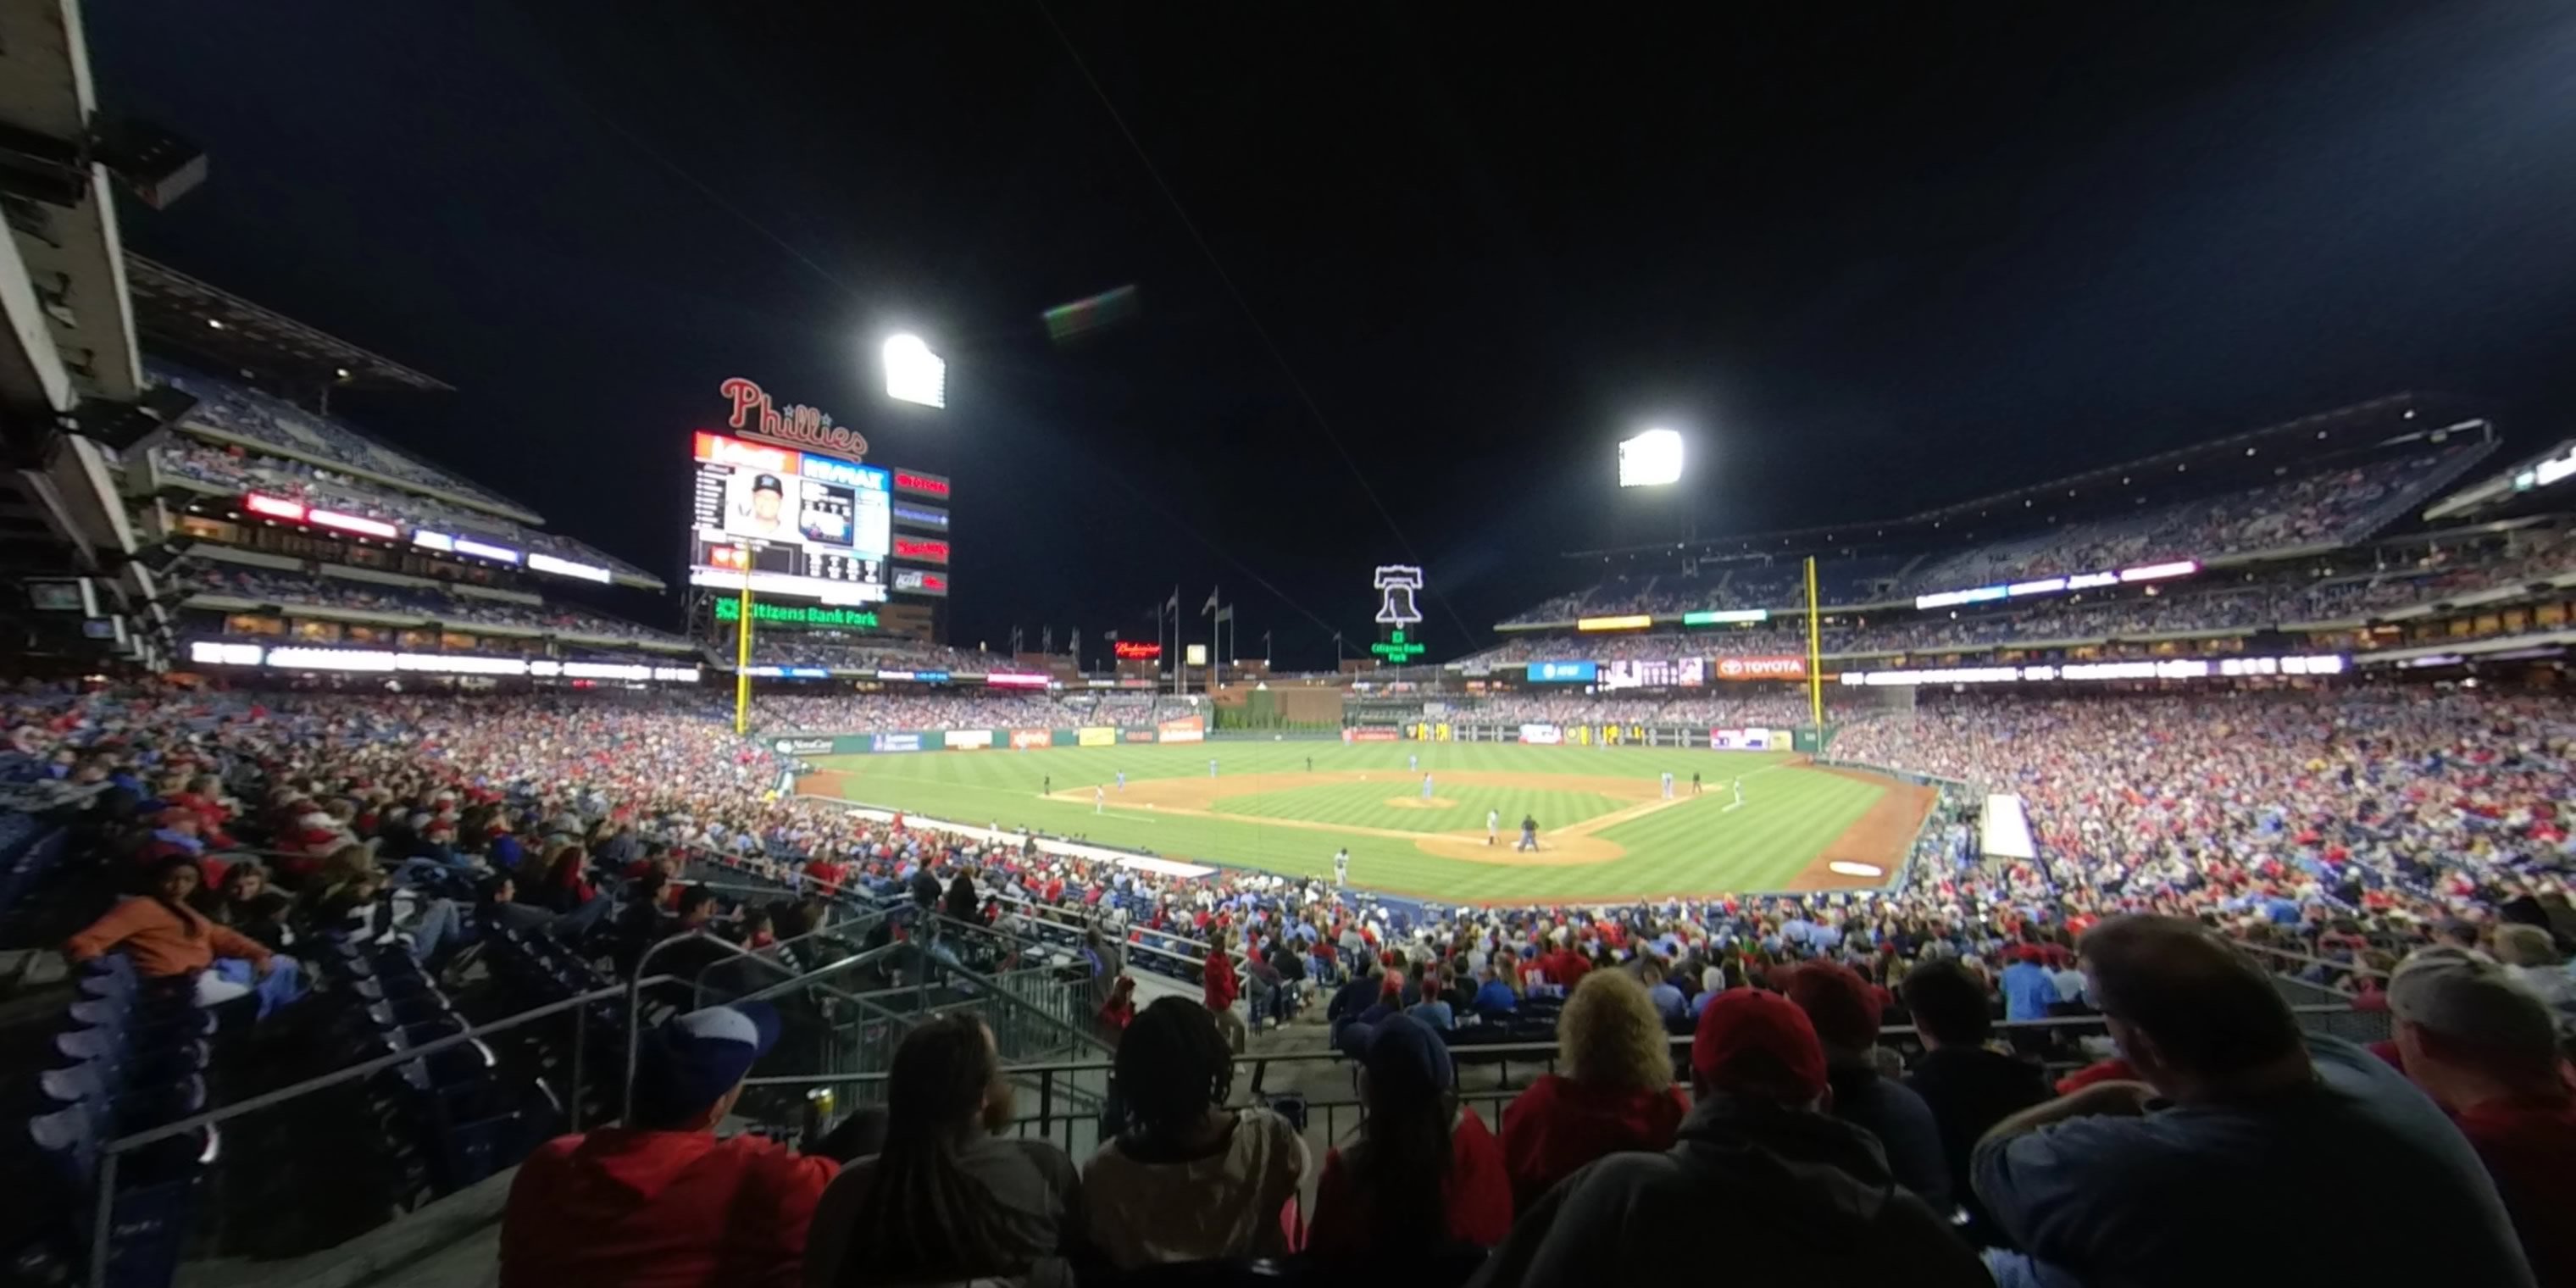 section 125 panoramic seat view  for baseball - citizens bank park